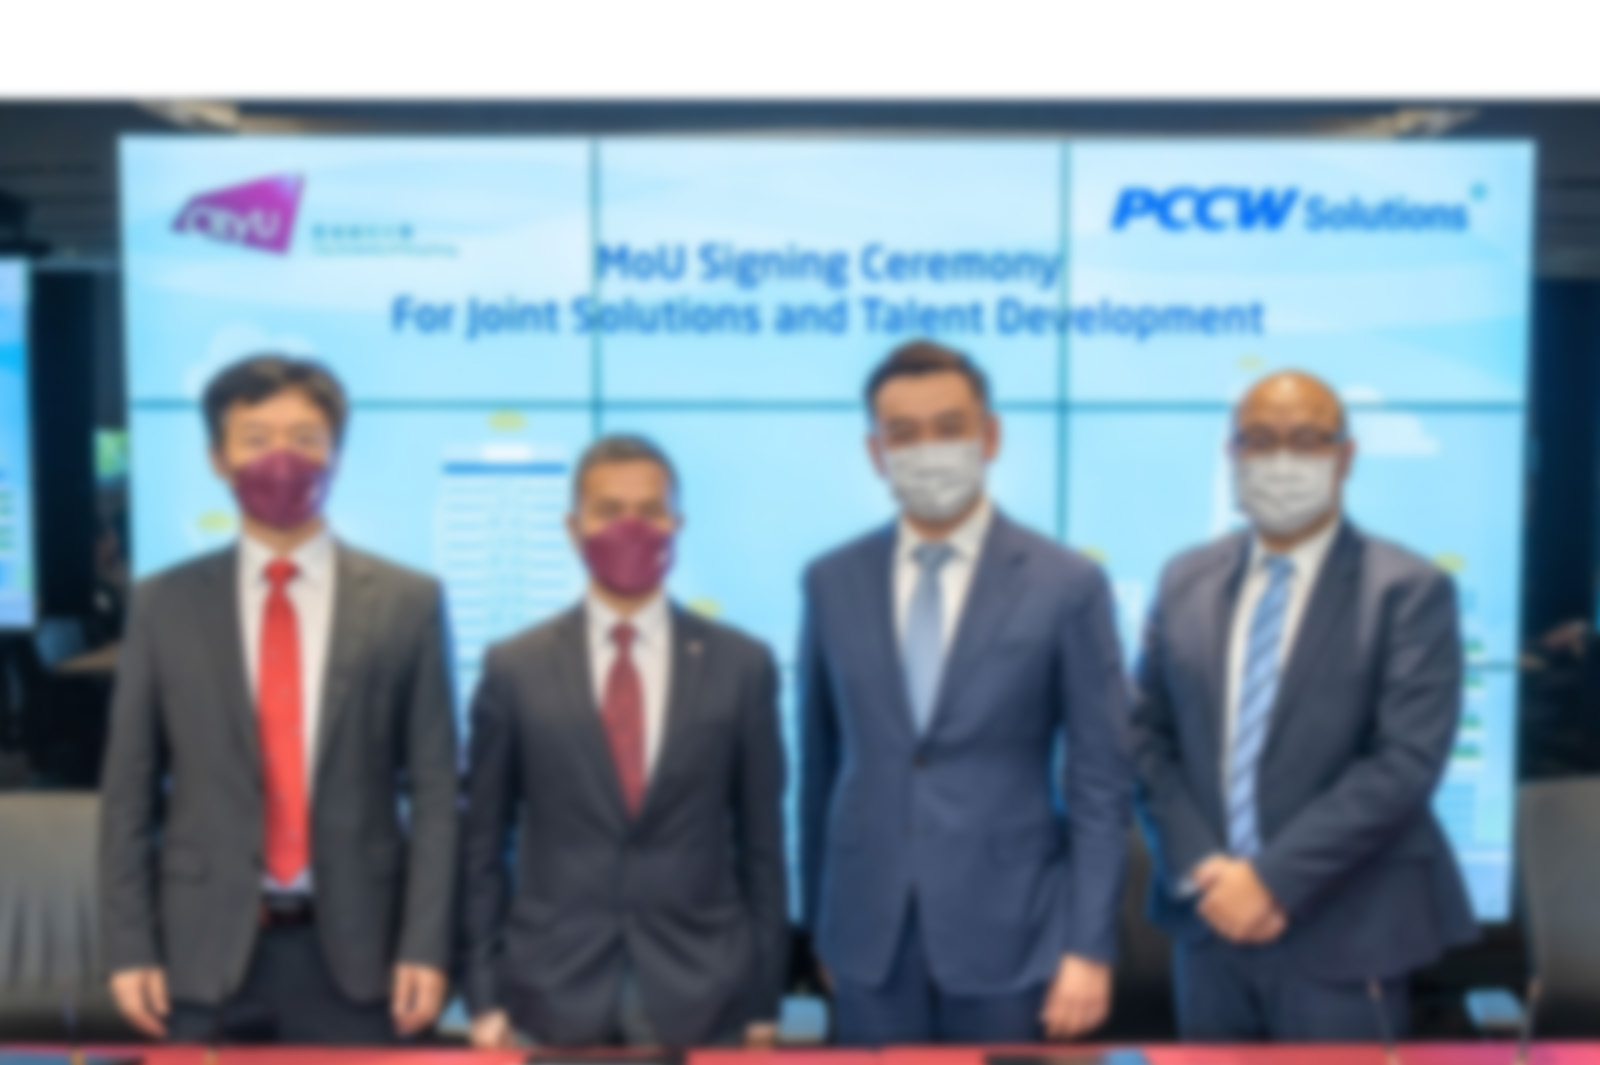 CityU, PCCW Solutions to co-develop Smart City solutions